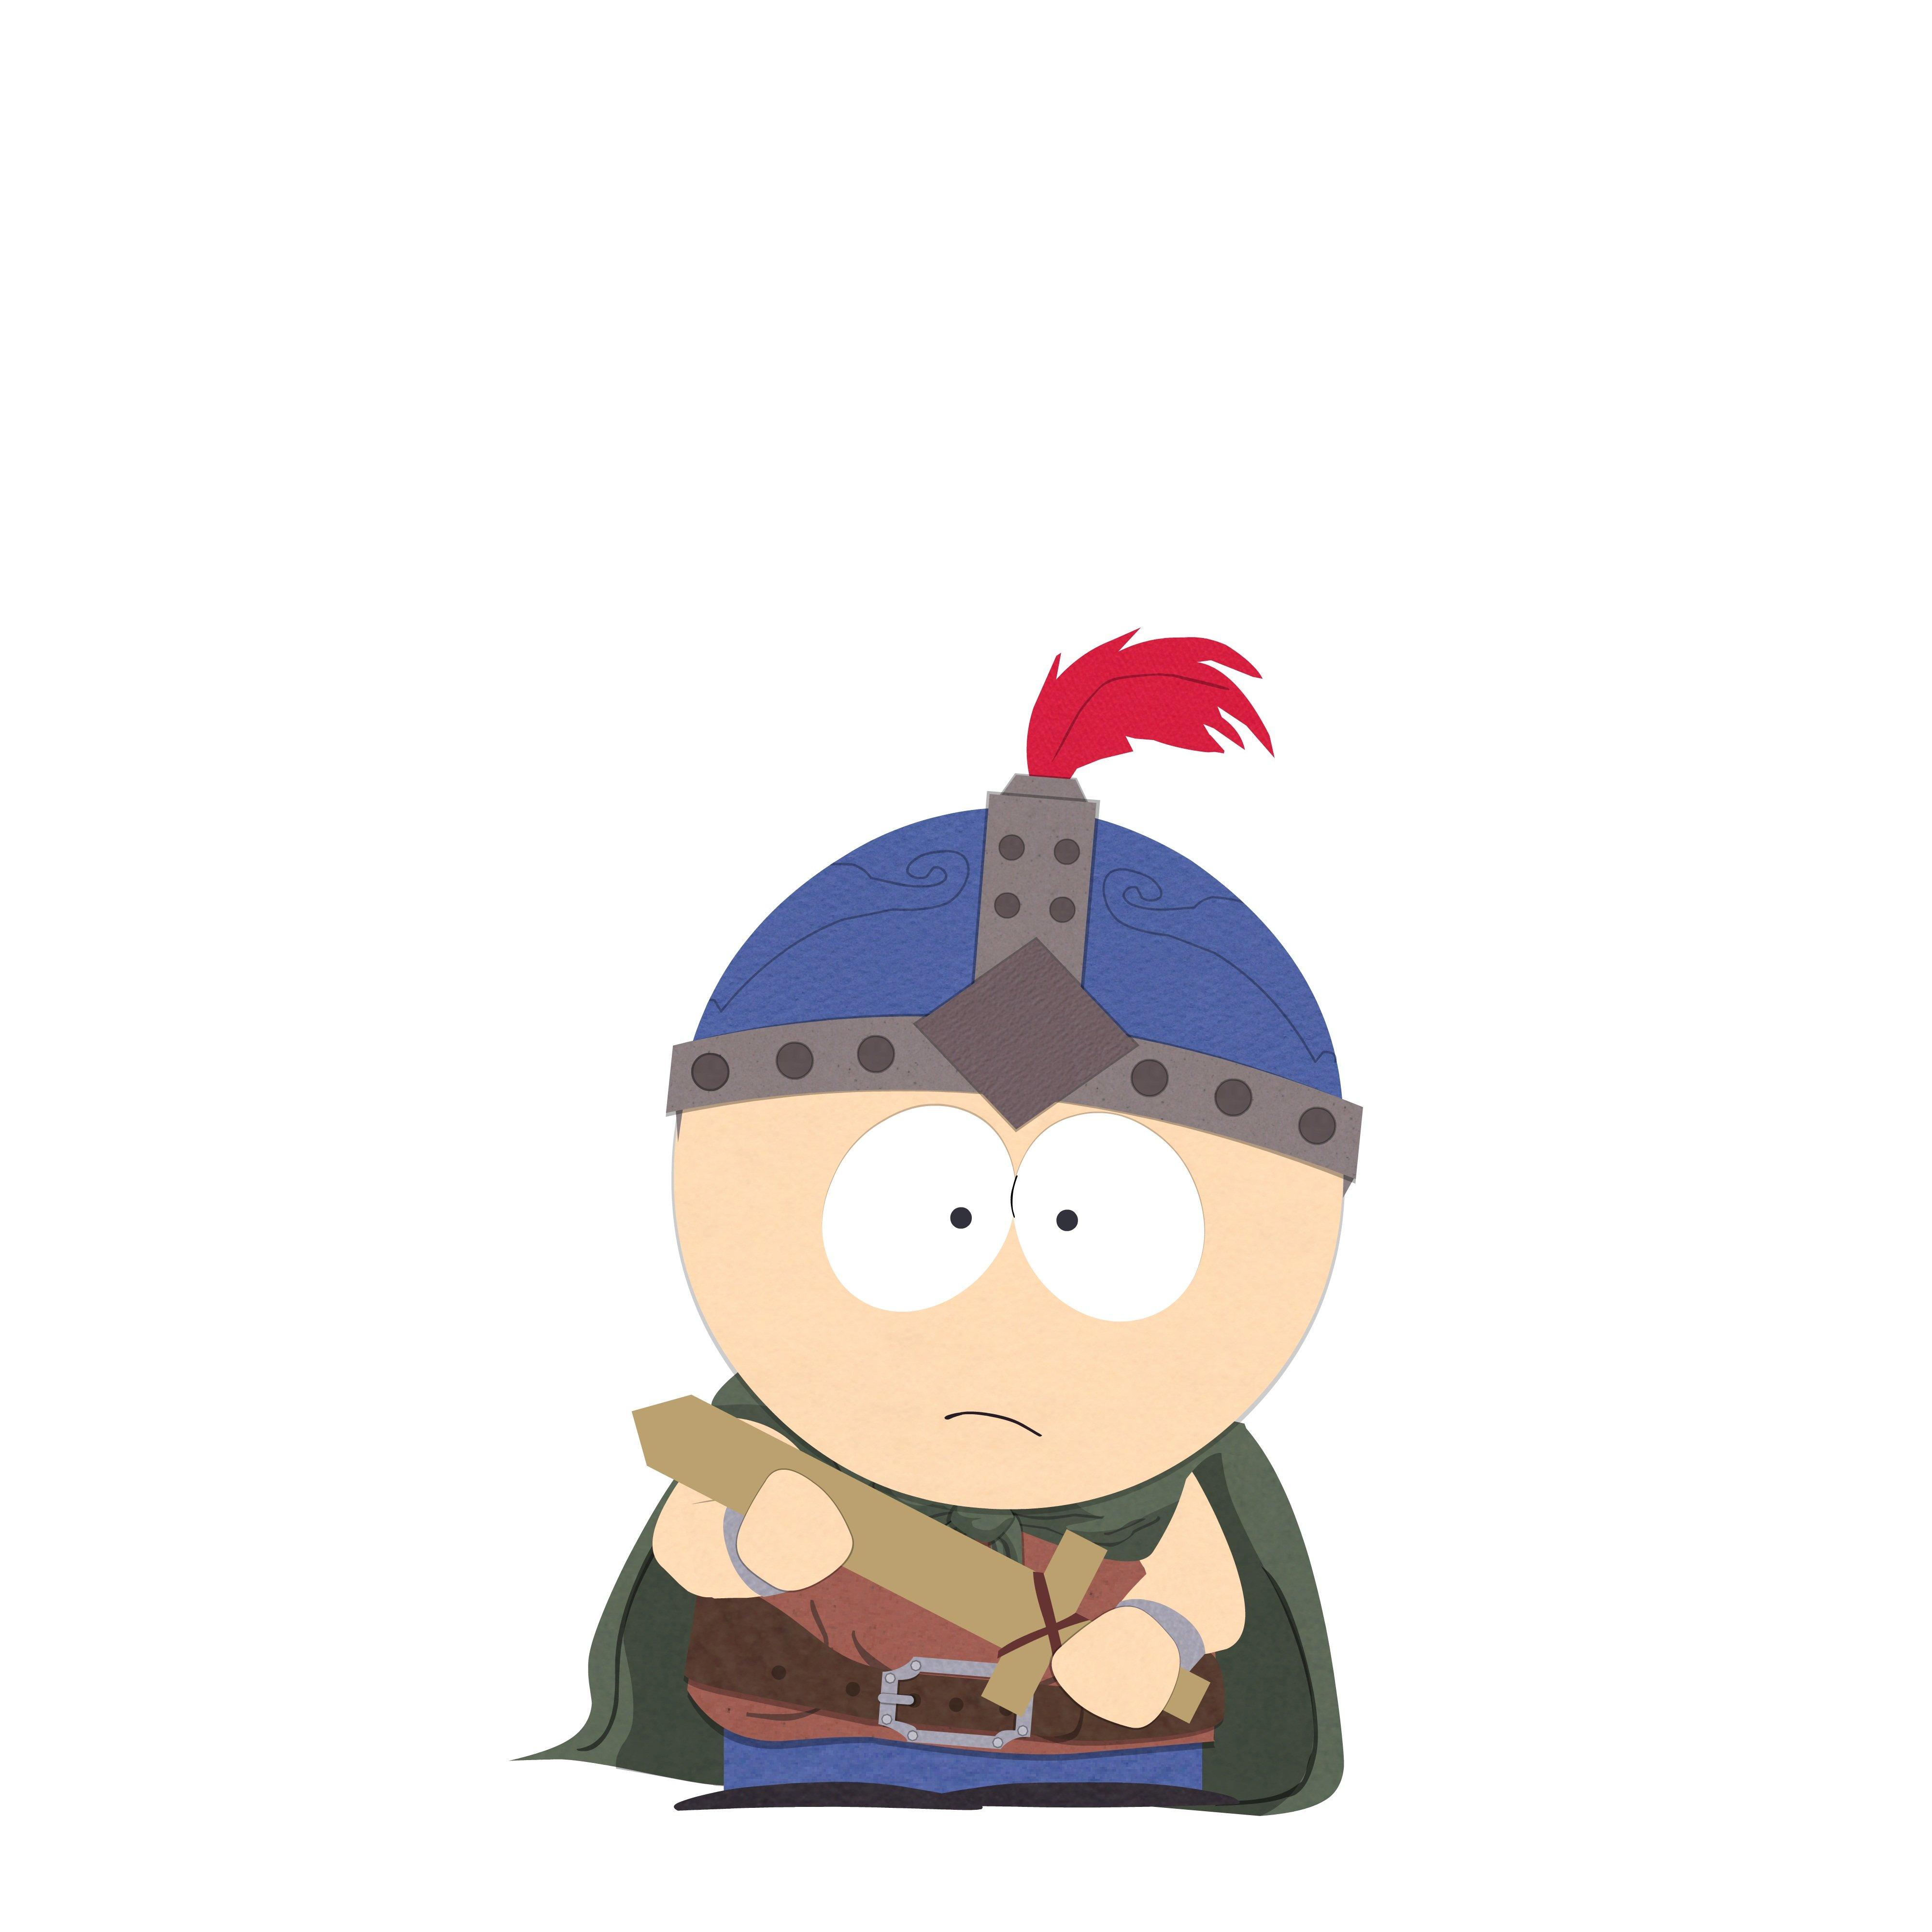 list item 5 of 16 South Park: The Stick of Truth